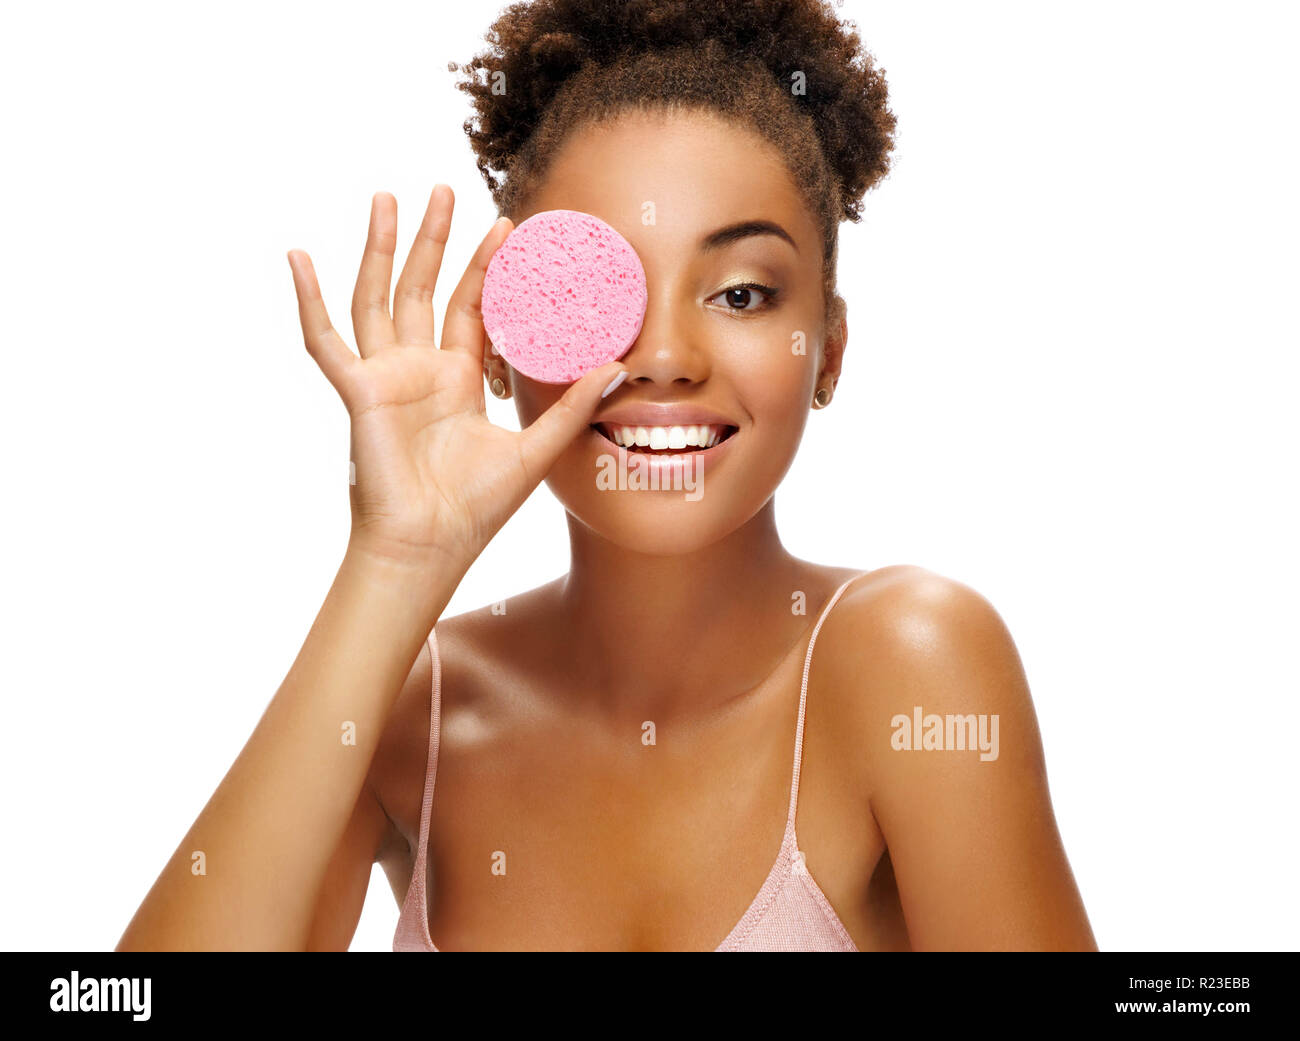 Funny girl holding pink sponge near her face. Portrait of young african american girl on white background. Youth and skin care concept Stock Photo